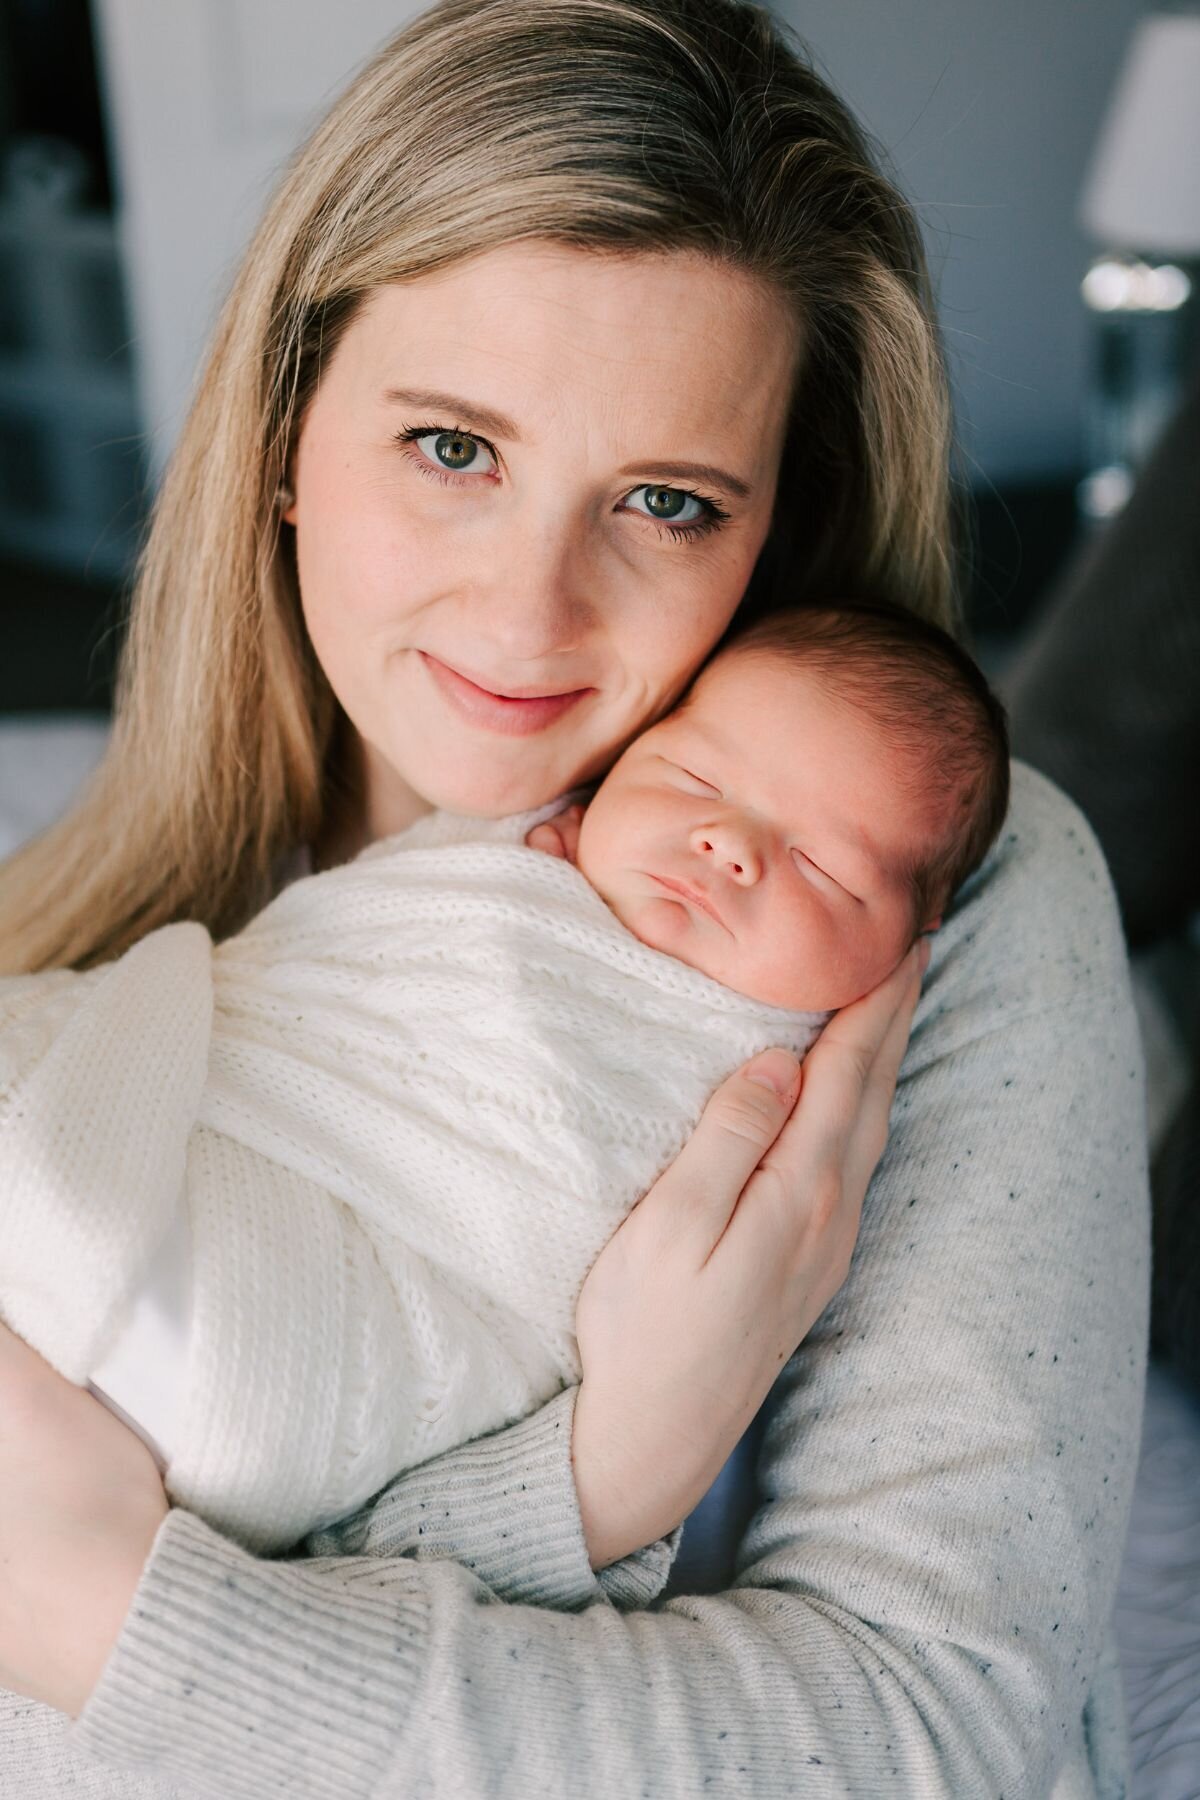 Newborn baby boy and mom face the camera for a portrait.